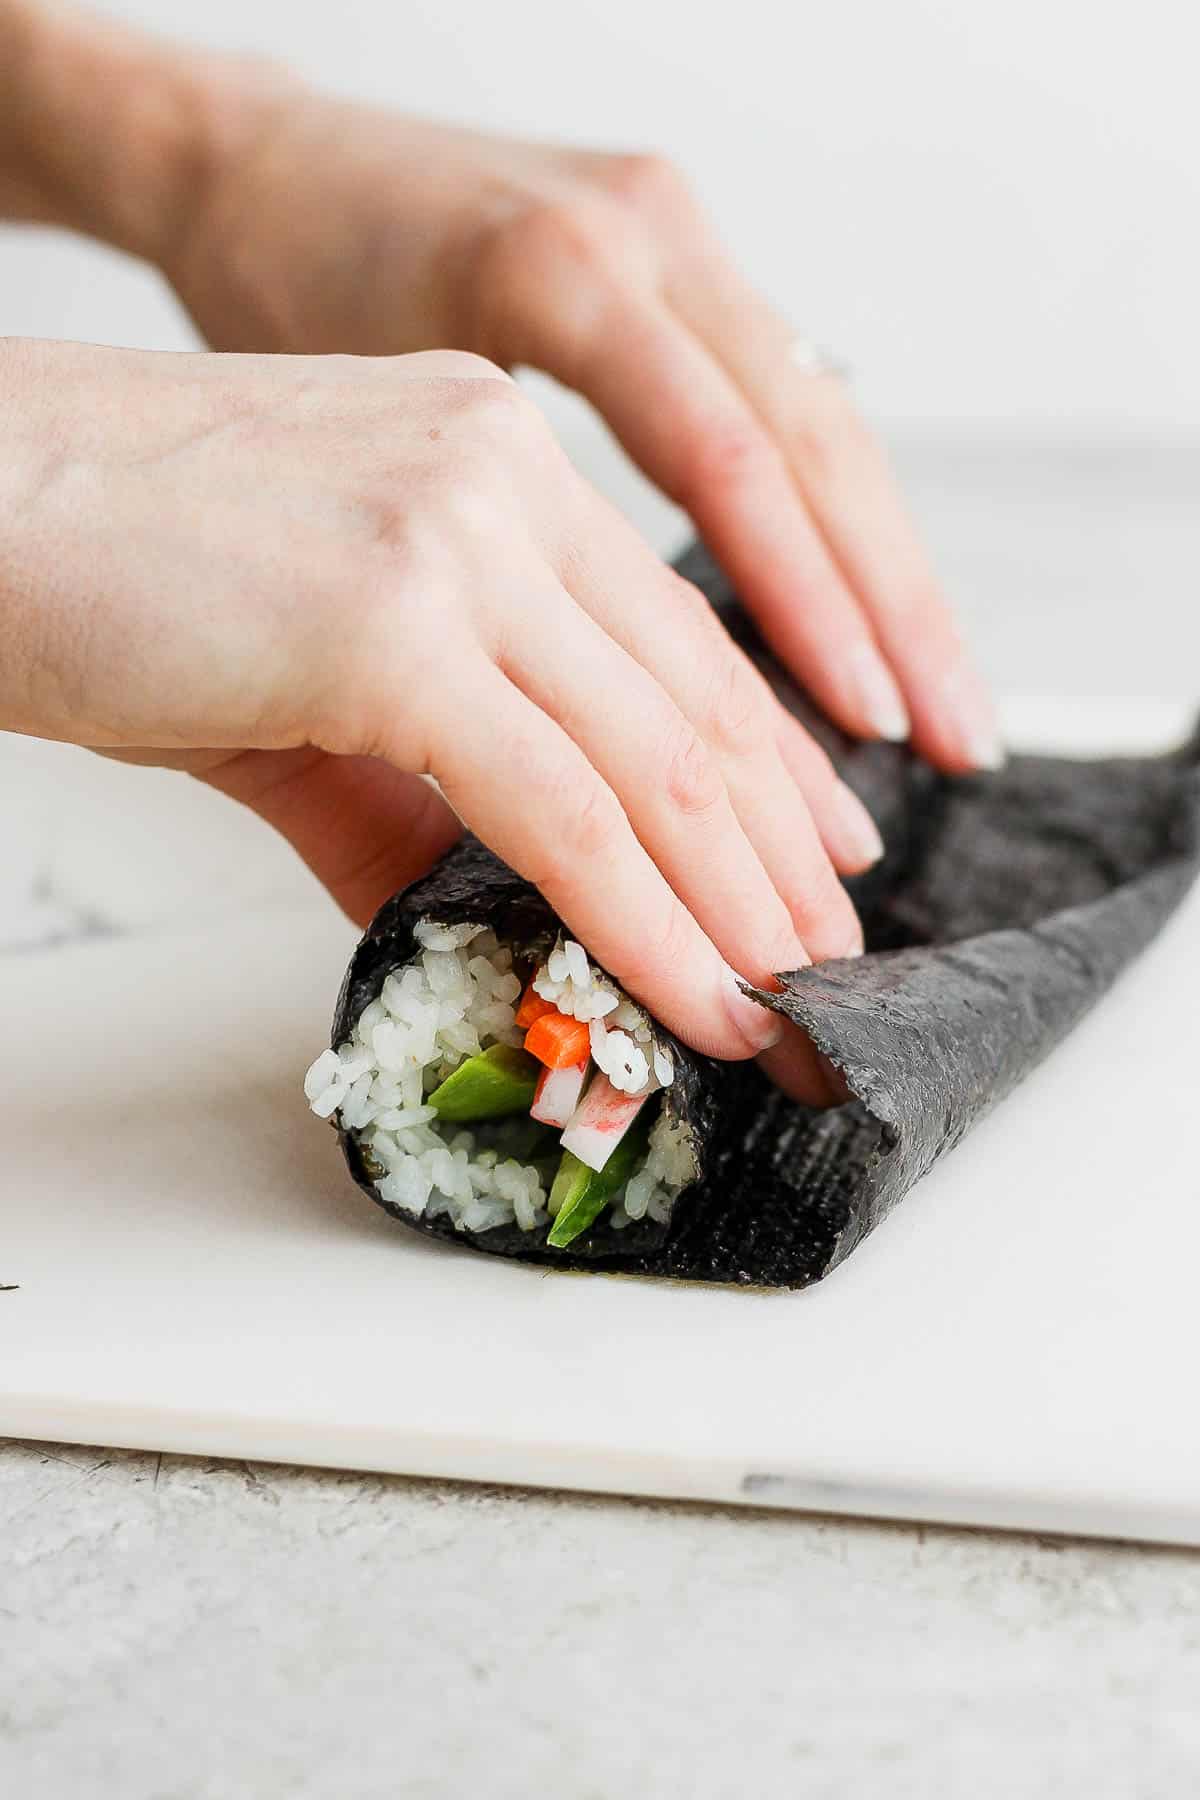 Two hands rolling the sushi burrito.